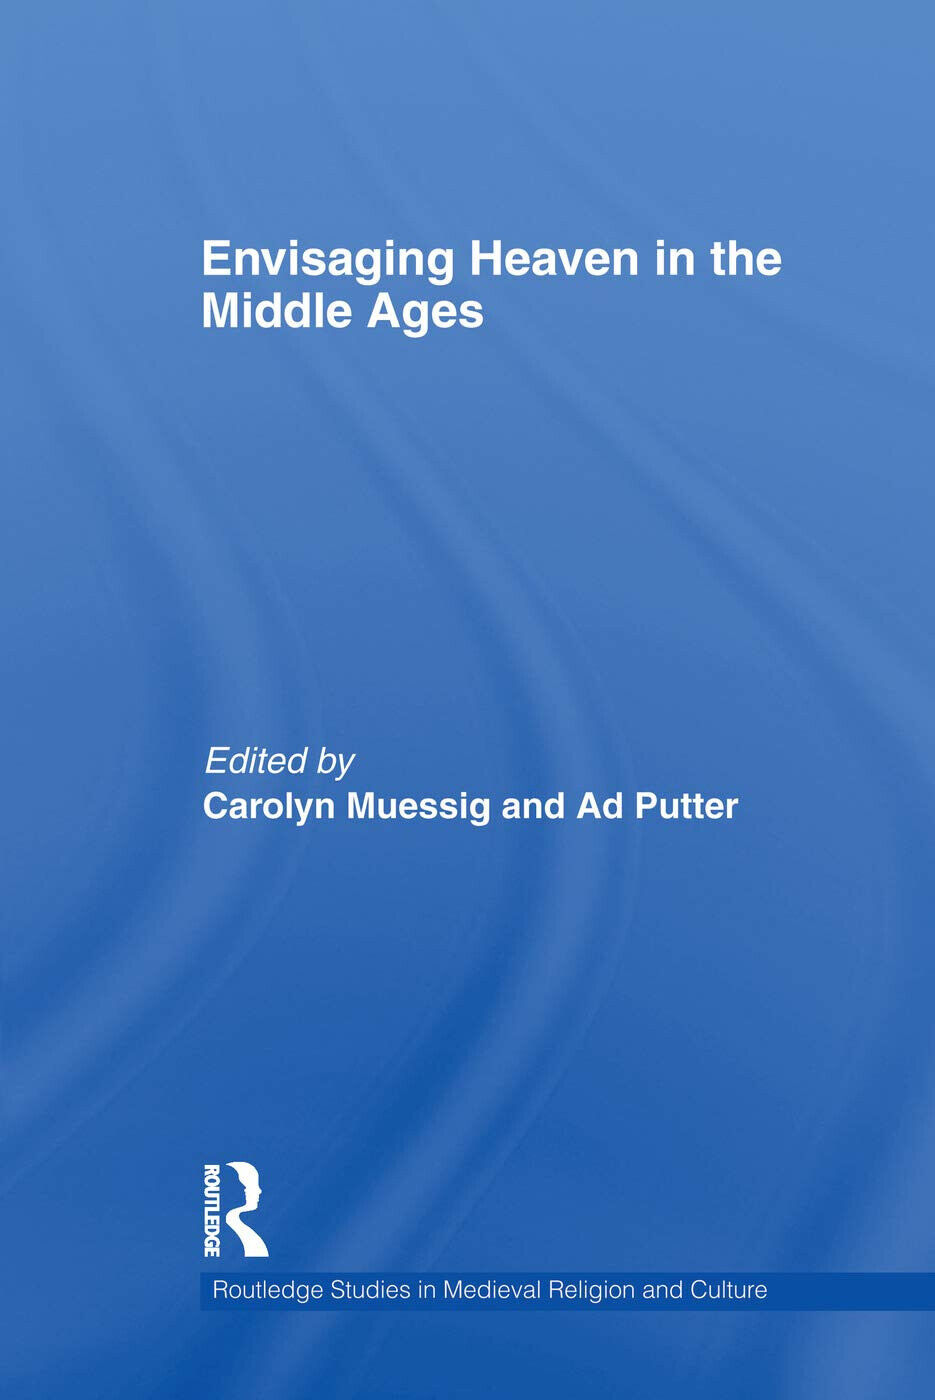 Envisaging Heaven In The Middle Ages - Carolyn Muessig - Routledge, 2014 libro usato